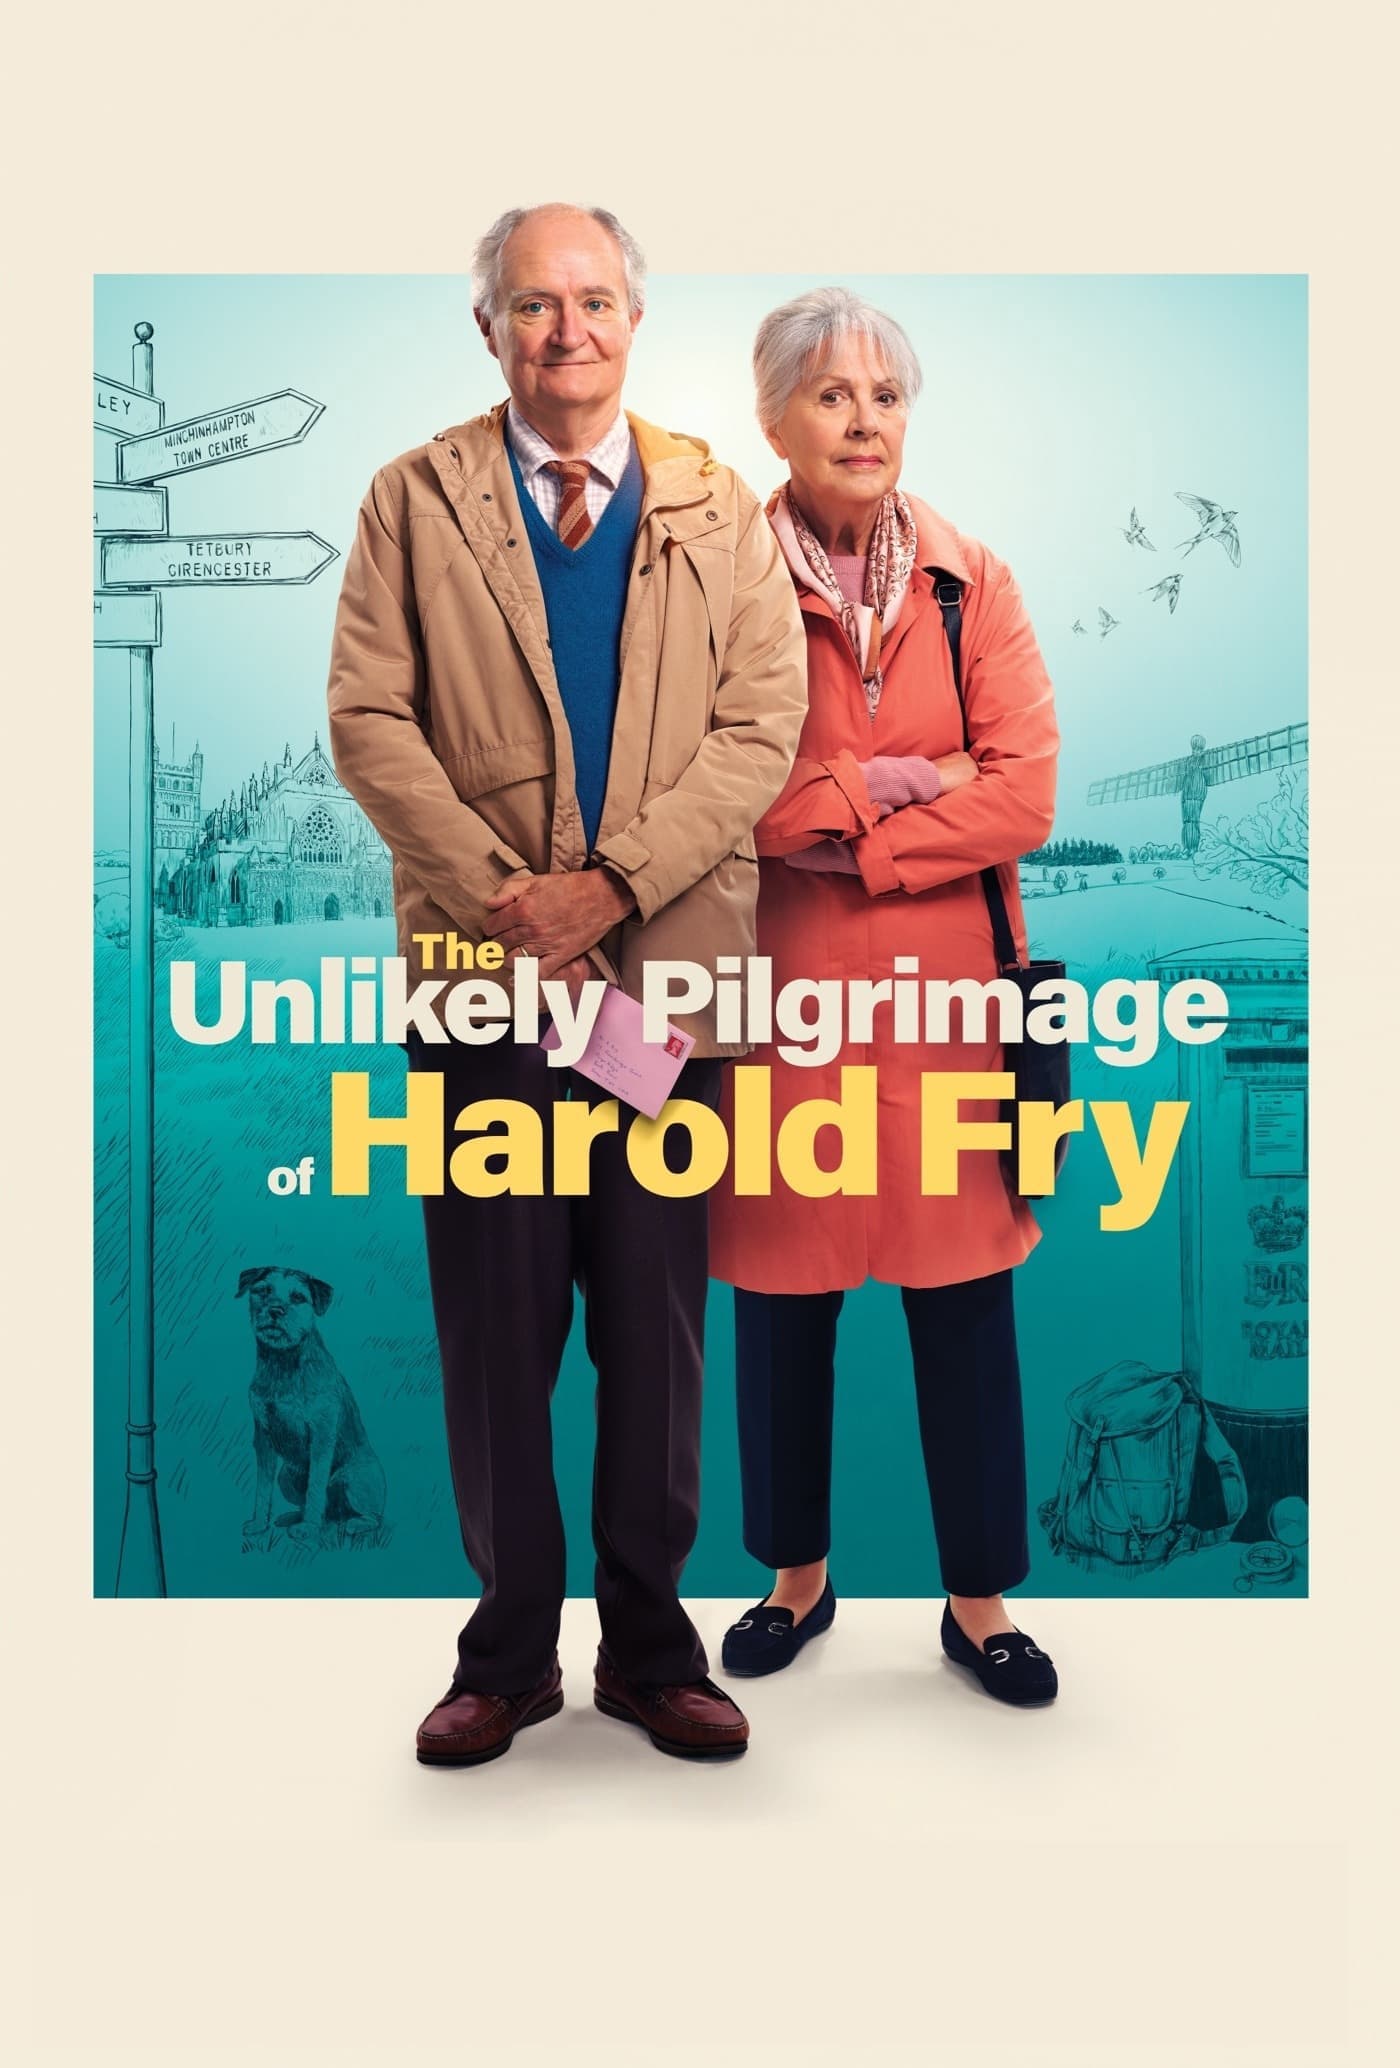 The Unlikely Pilgrimage of Harold Fry Official Trailer